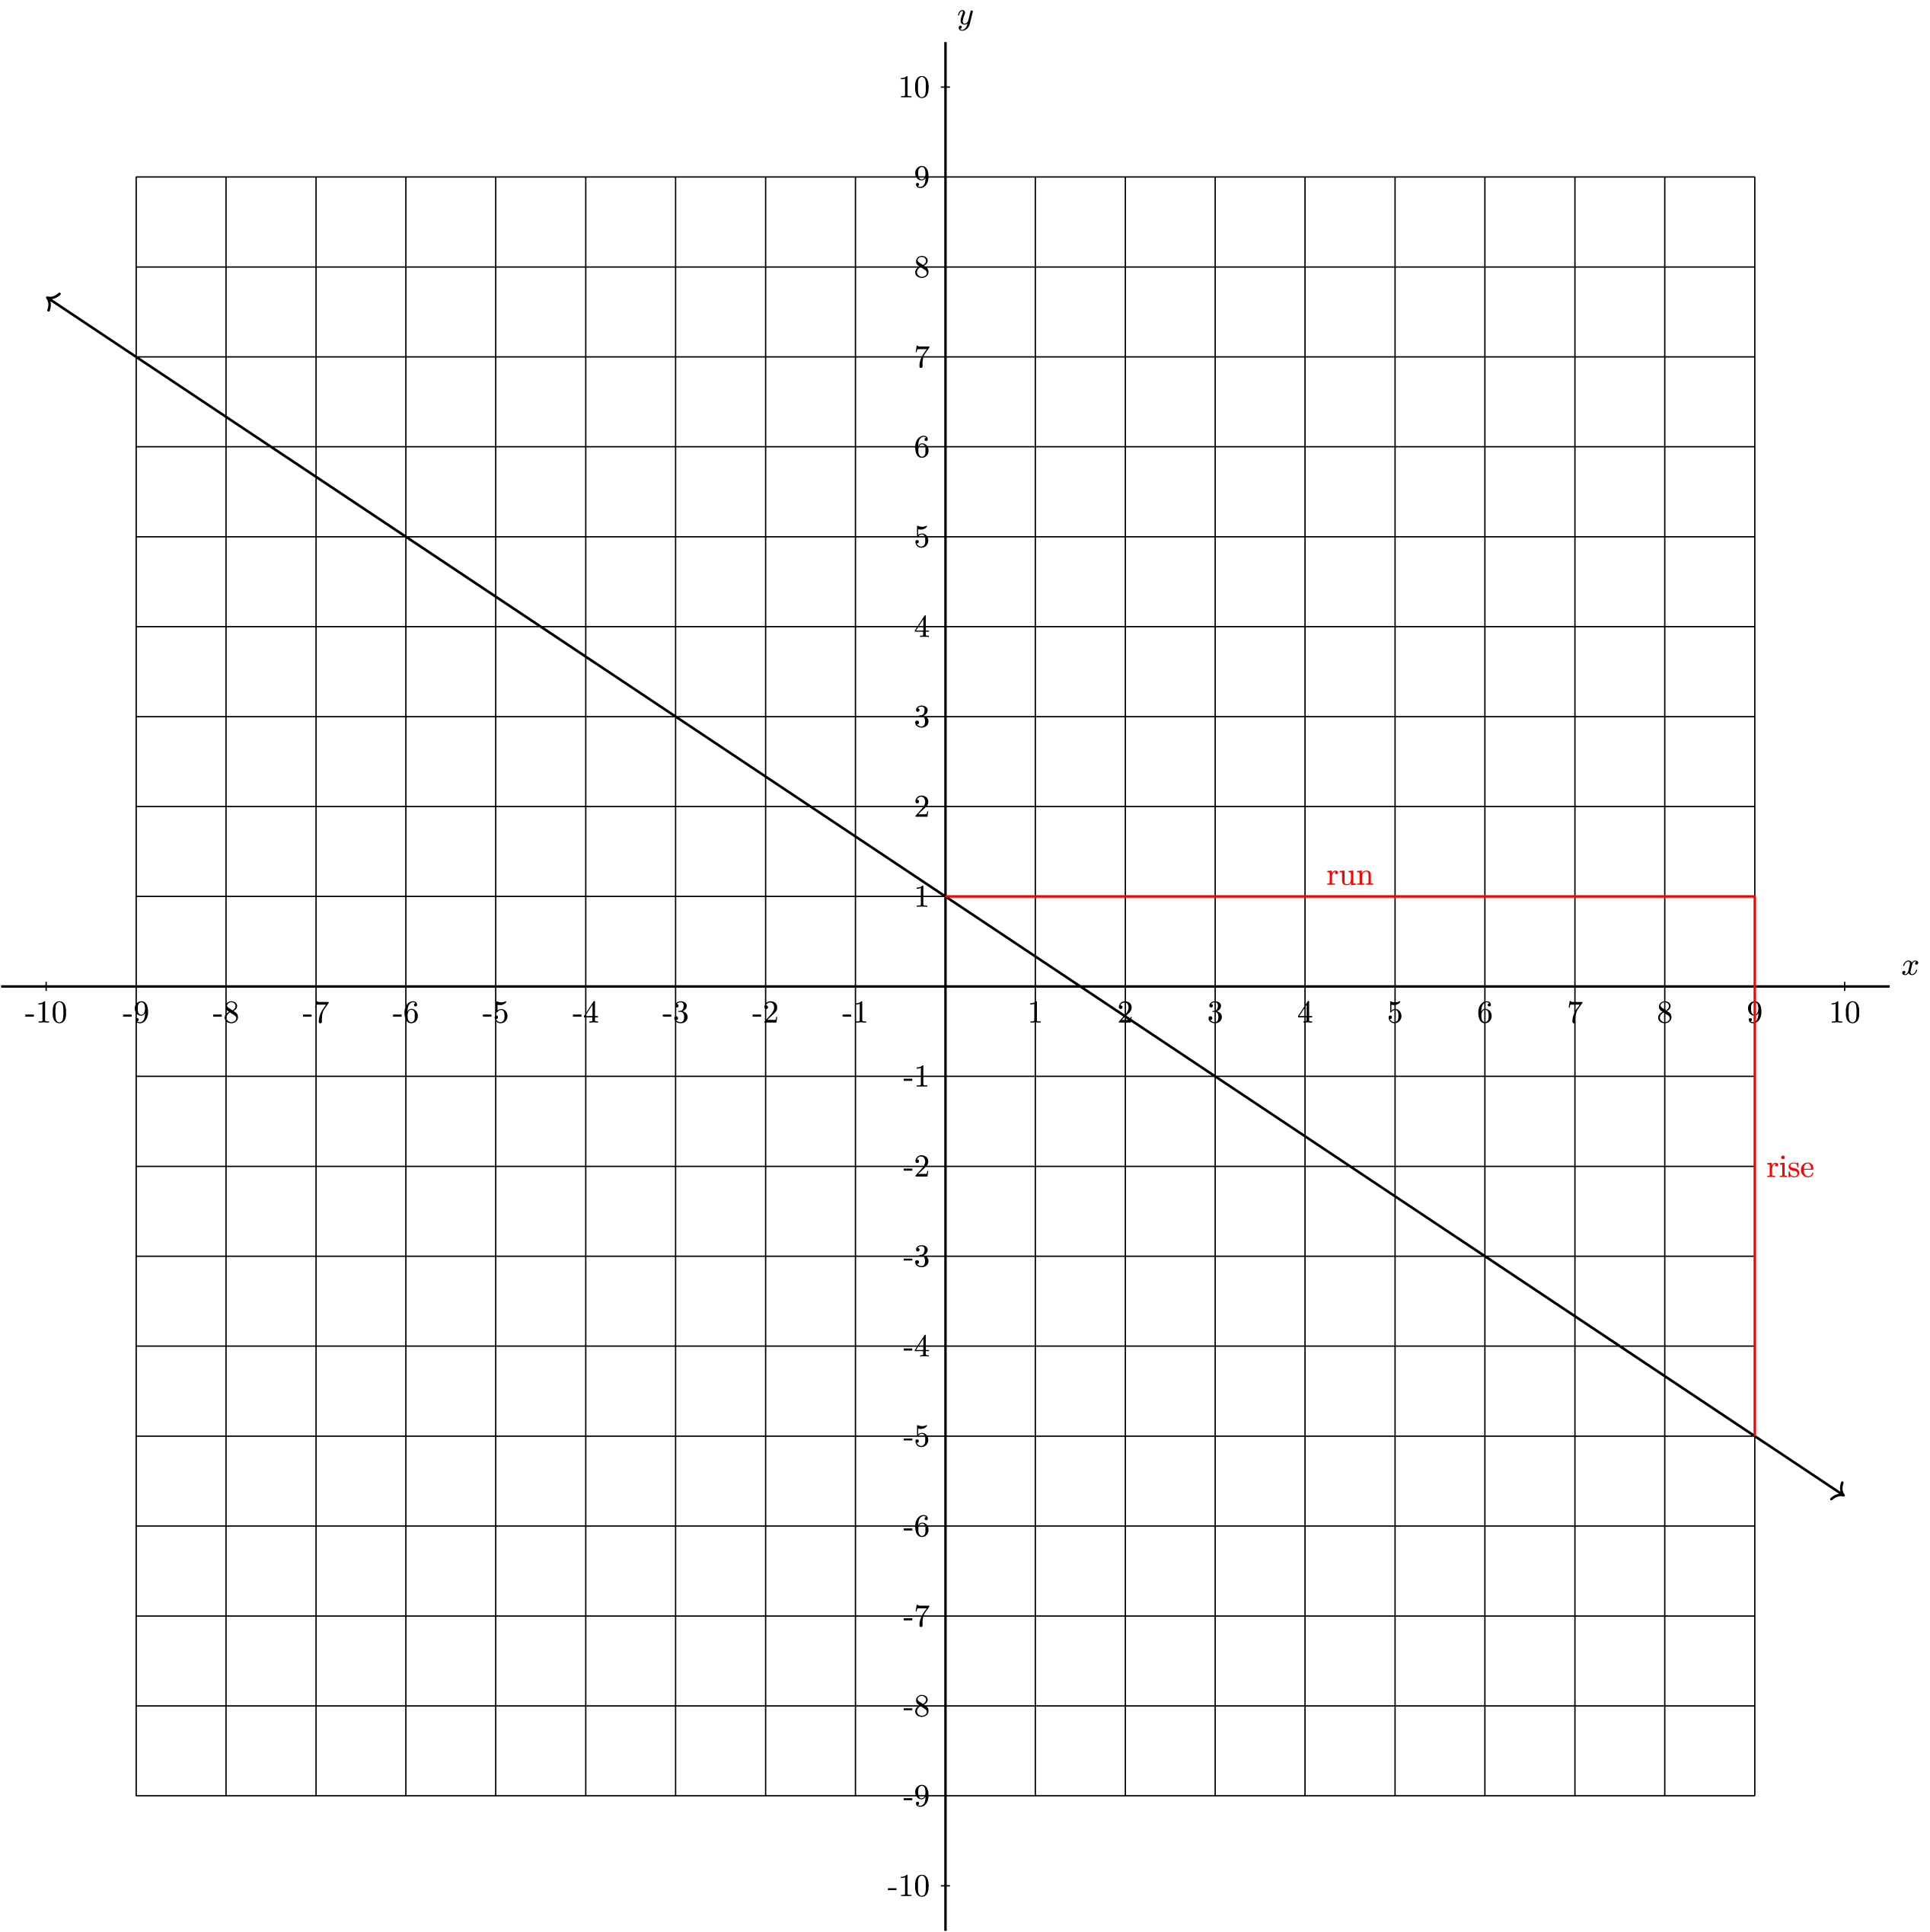 A line with a y-intercept of 1. Another point on the line is (9,-5). In addition, a horizontal line is drawn from (9,-5) to (9,1) and then a vertical line is drawn from (9,1) to (0,1)